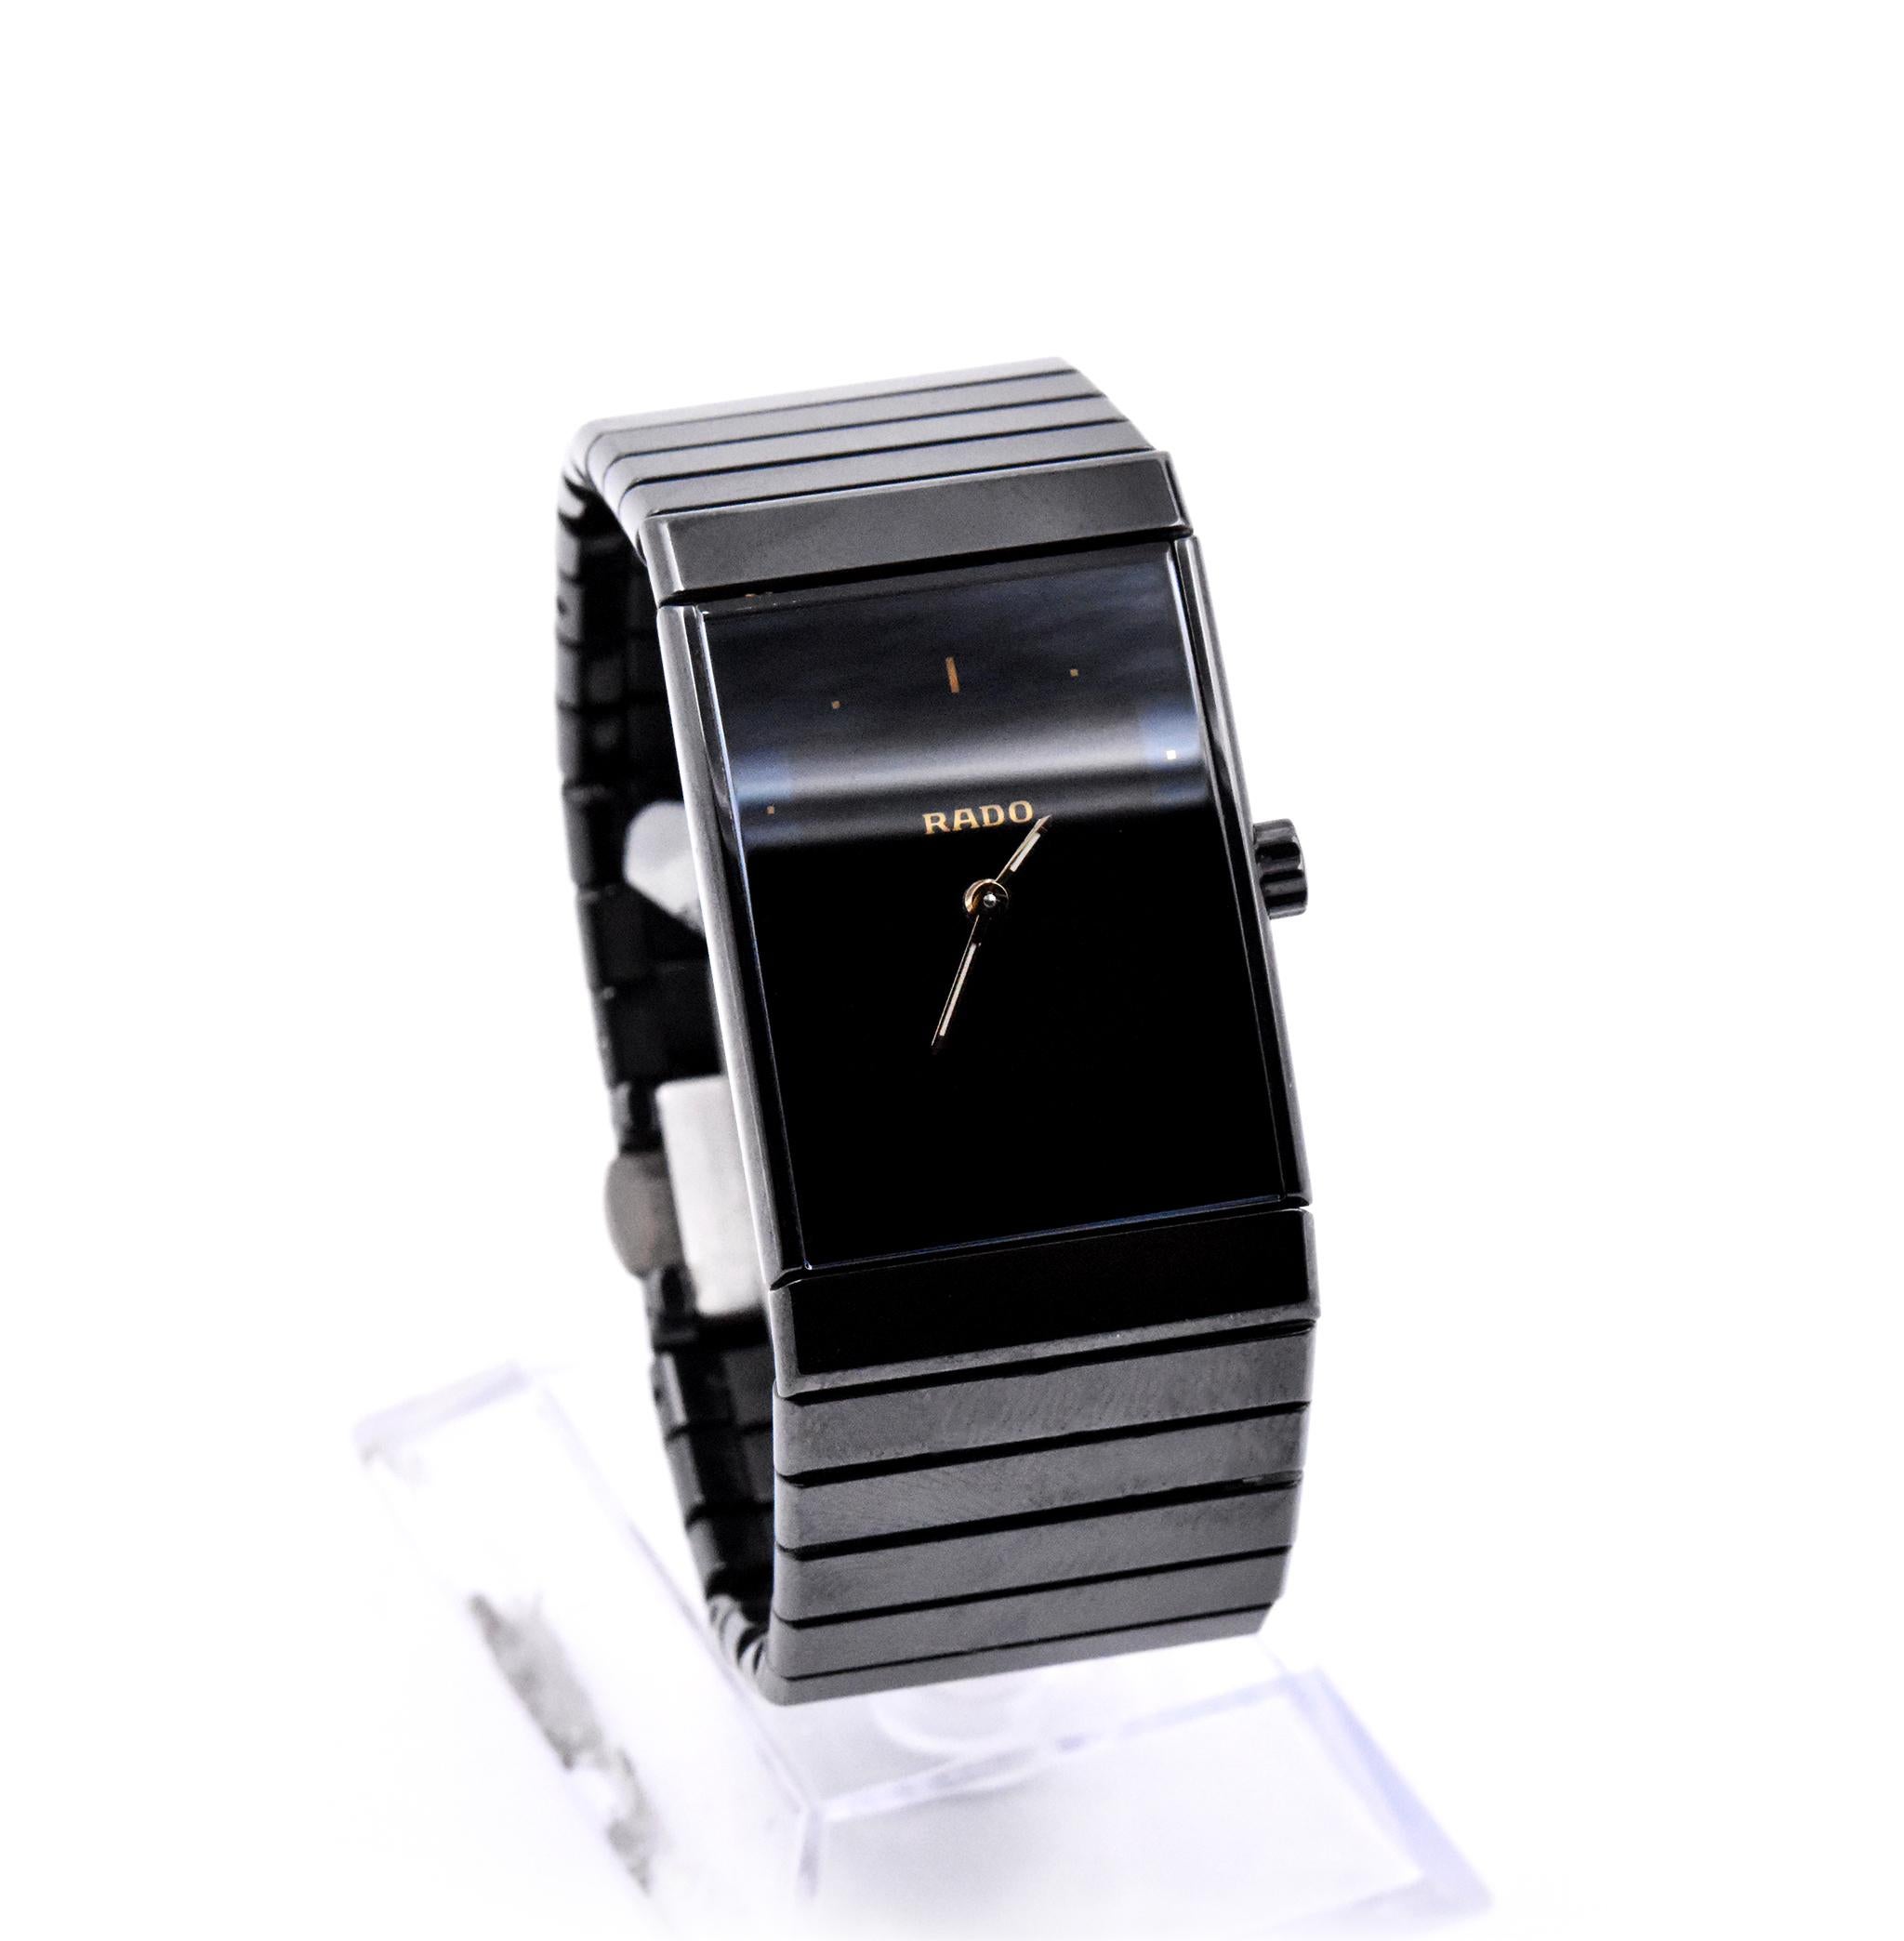 Movement: quartz 
Function: hours, minutes
Case: 30mm x 24.30mm rectangular ceramic case, push/pull crown, sapphire crystal
Dial: black dial, gold hands
Reference: 196.0364.3
Case #: 01965XXX


Does not come with original box or